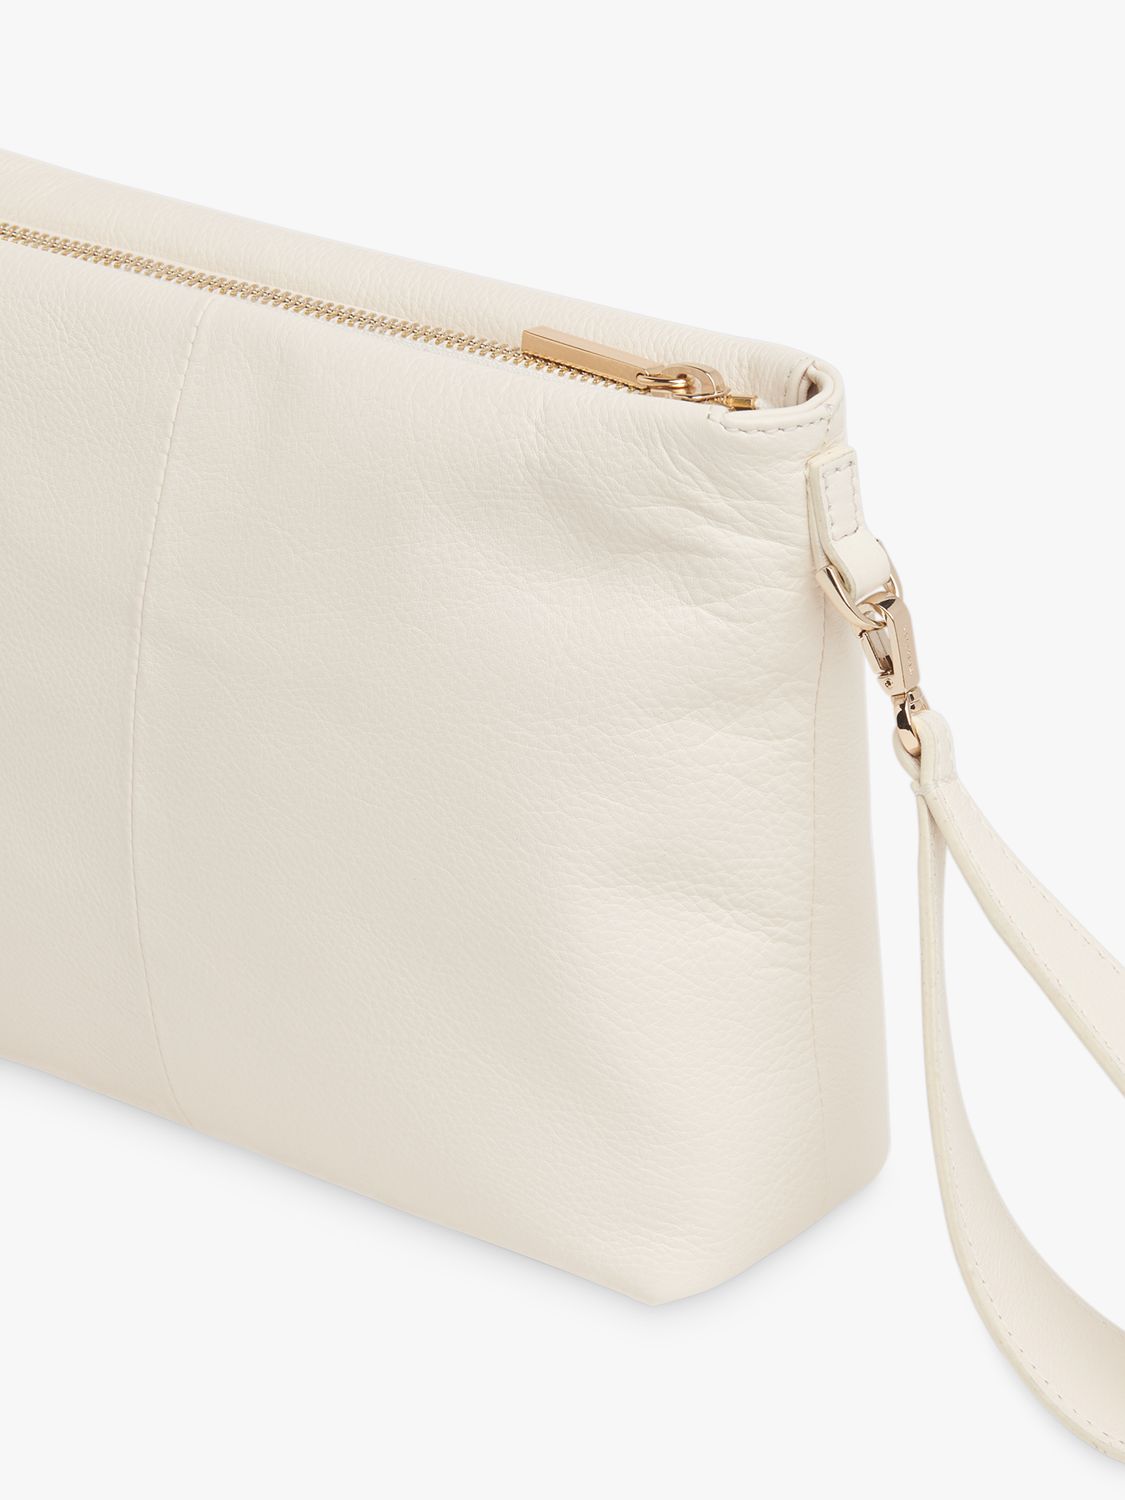 Whistles Avah Leather Zip Clutch Bag, Ivory at John Lewis & Partners